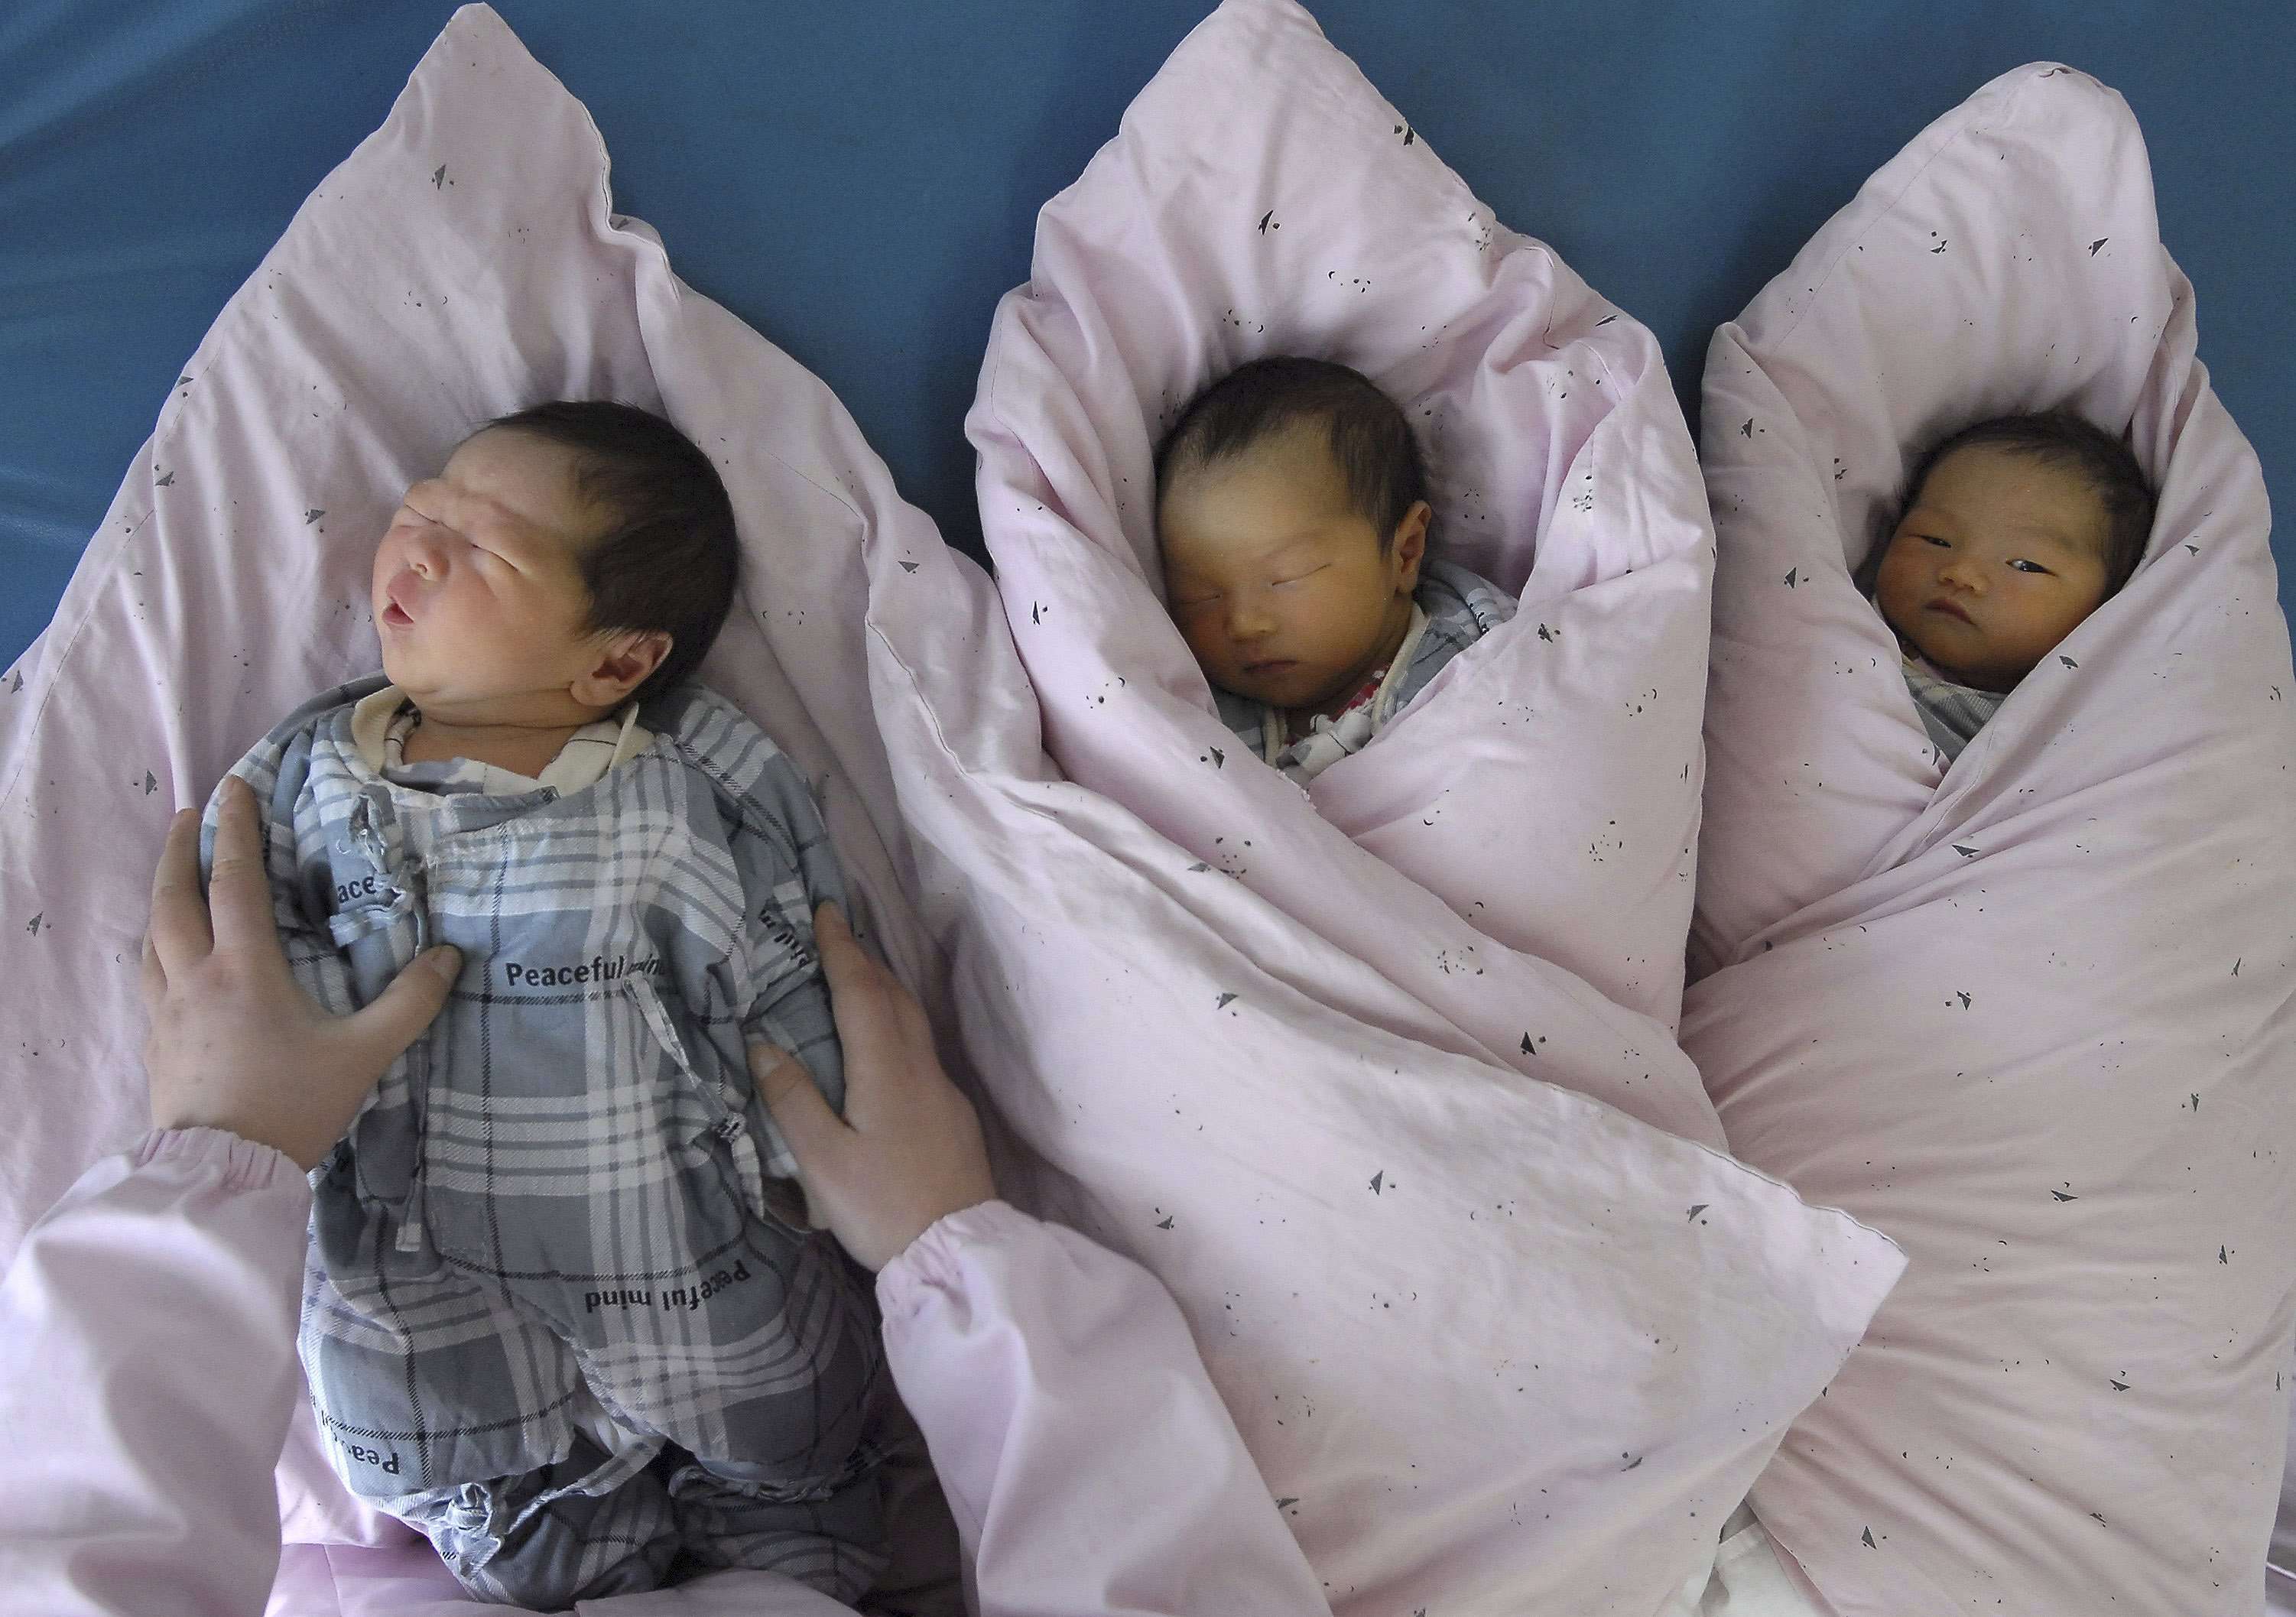 China’s strict one-child policy, introduced in 1979, was fully relaxed on January 1 last year amid concerns over a shrinking workforce, greying population and gender imbalance. Photo: Reuters